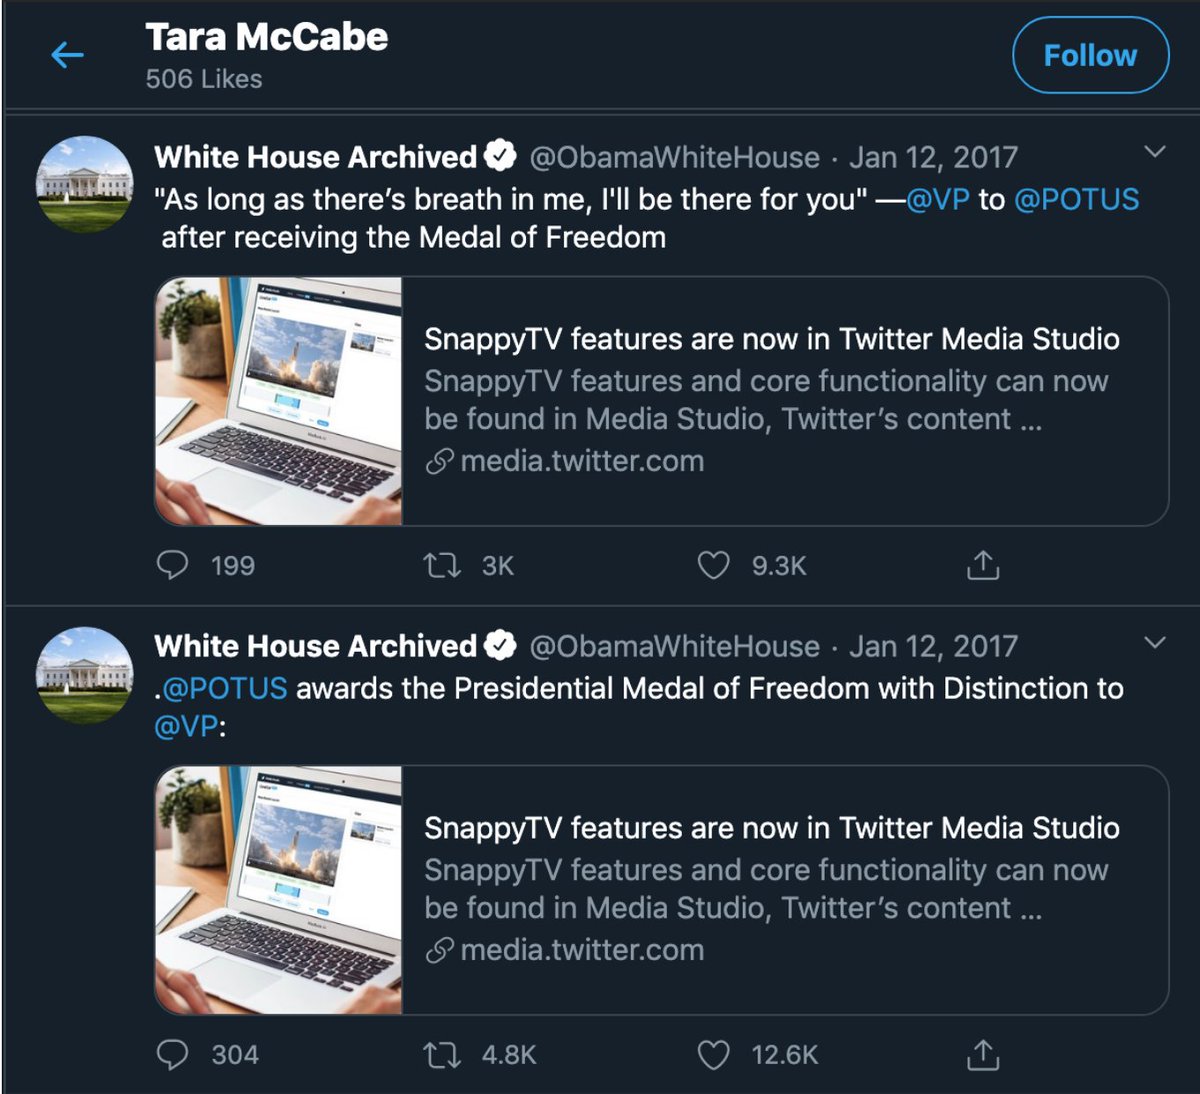 It's not just one time, but Tara Reade did it over and over again-- praising Joe Biden through multiple tweets, retweets, and likes in 2016 and 2017 (thread)